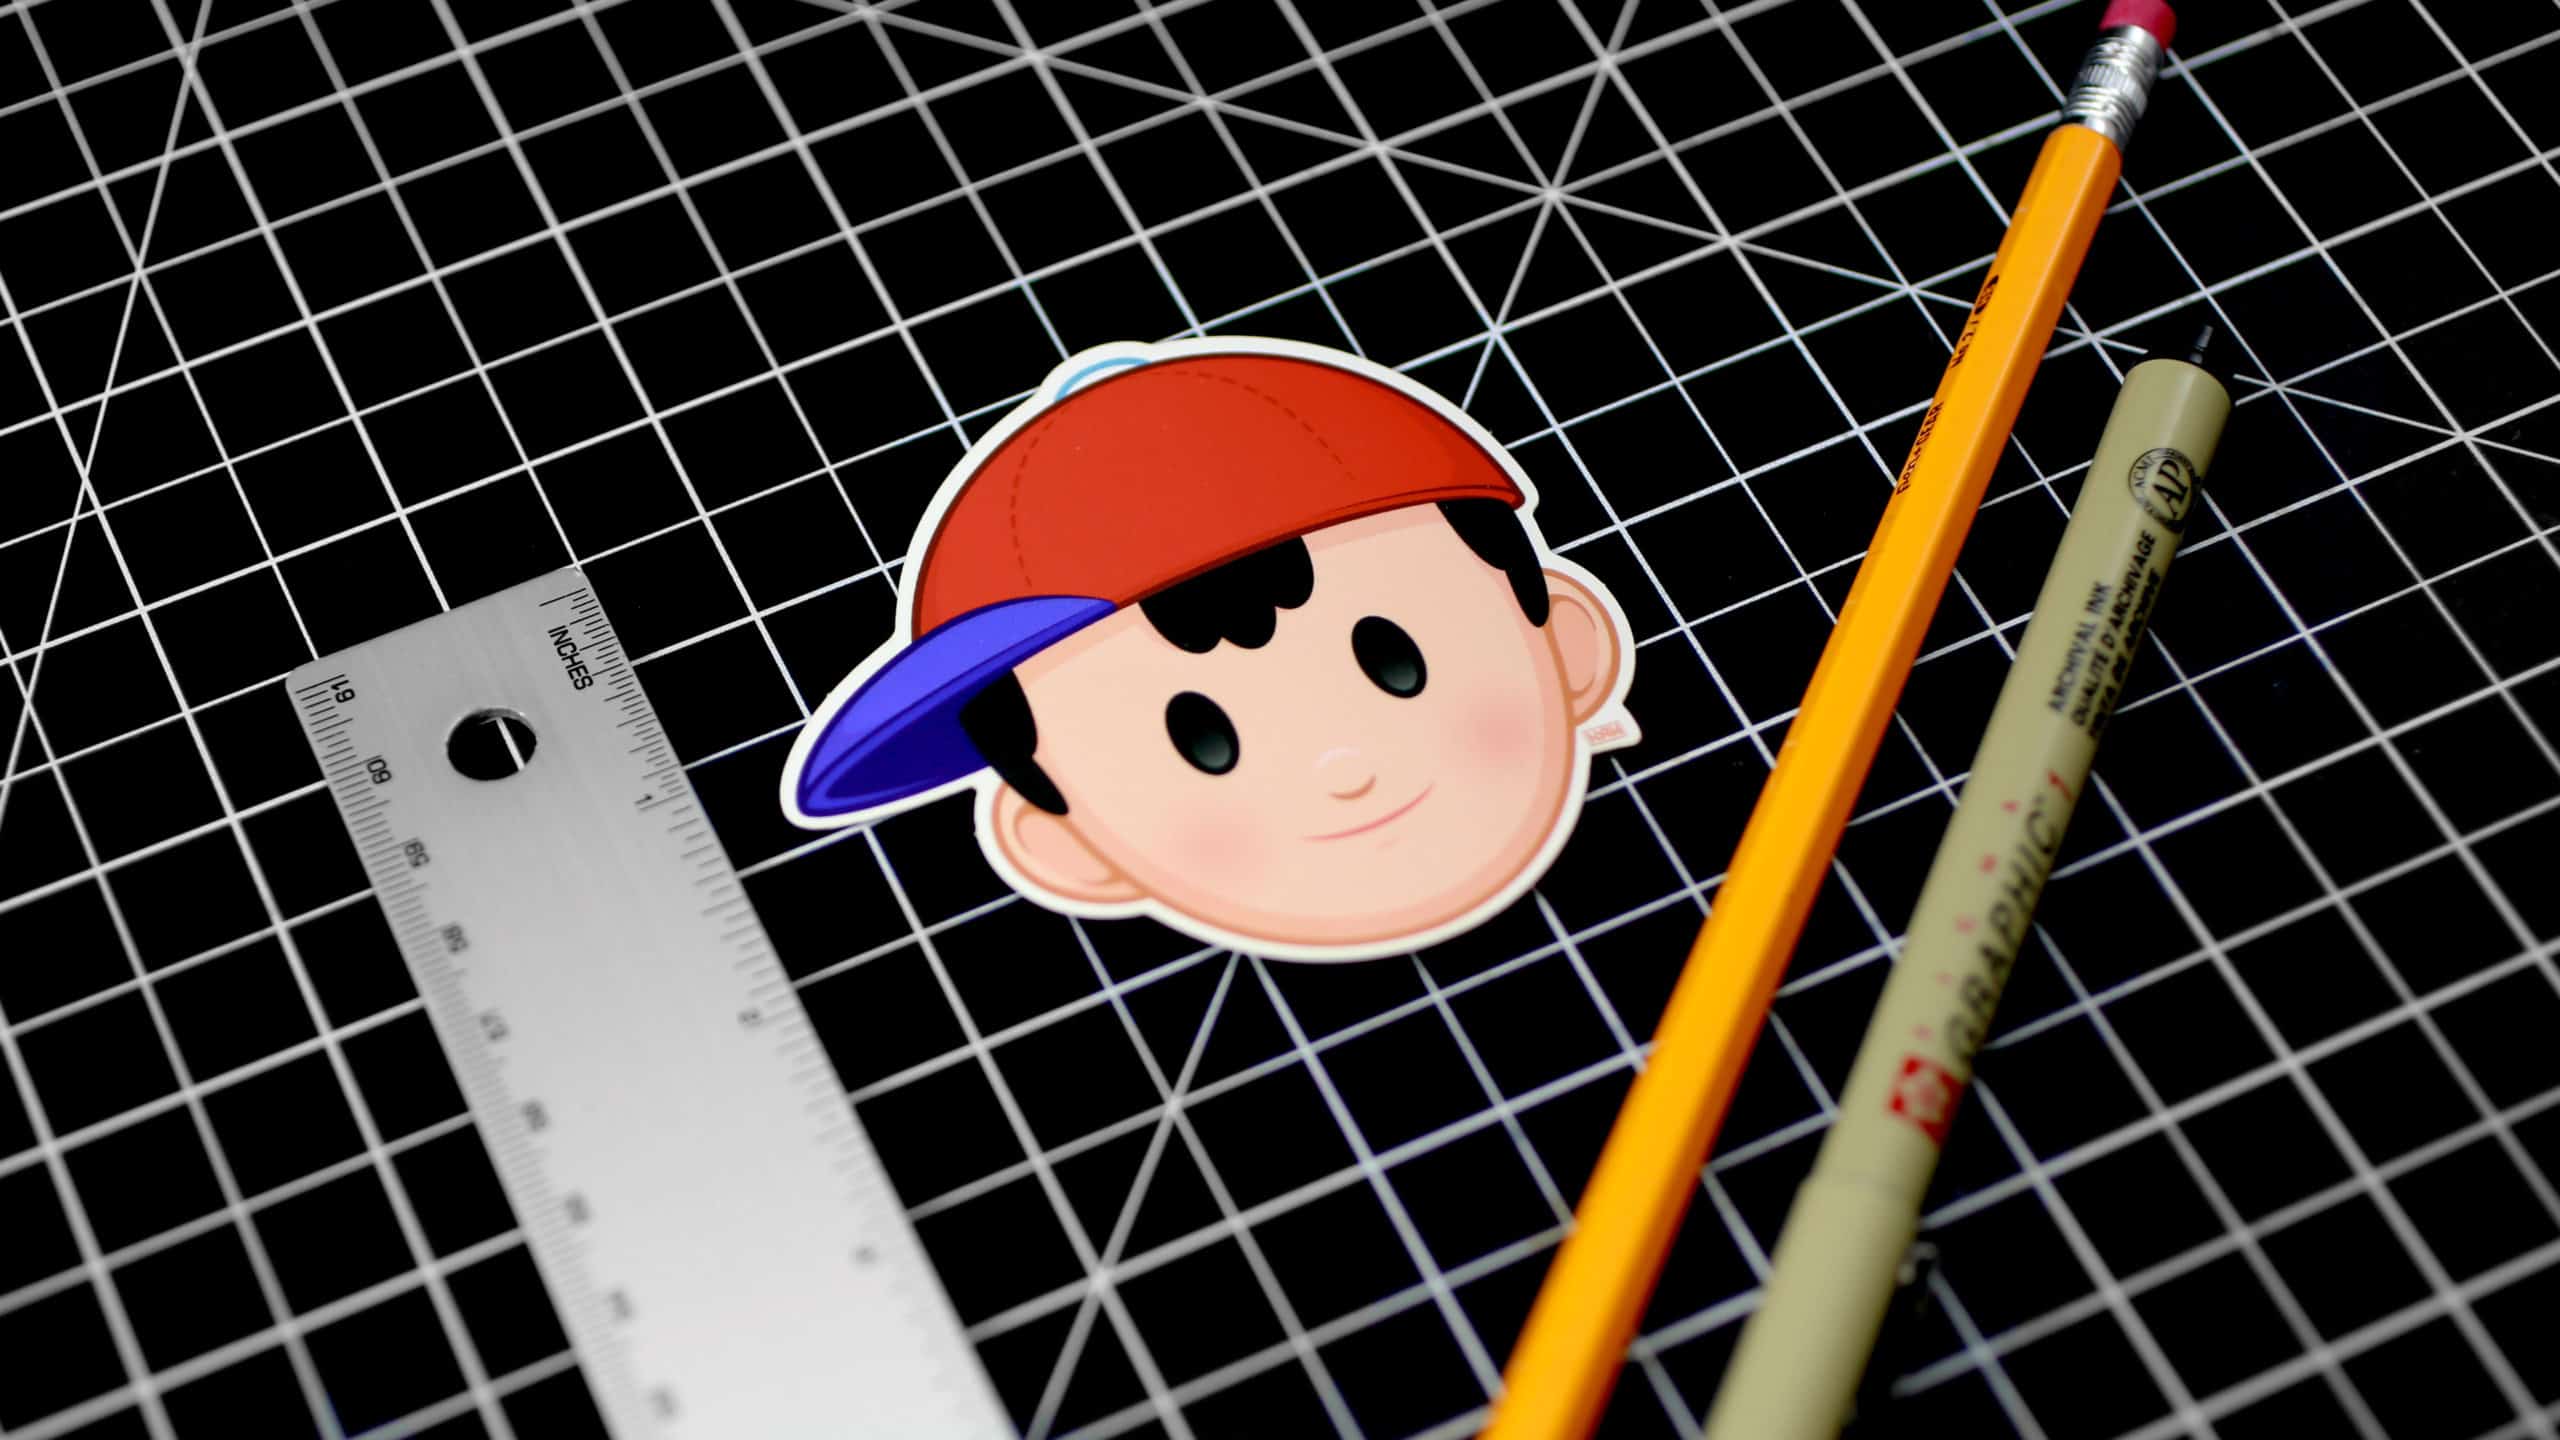 Ness Ninten Sticker for iOS & Android